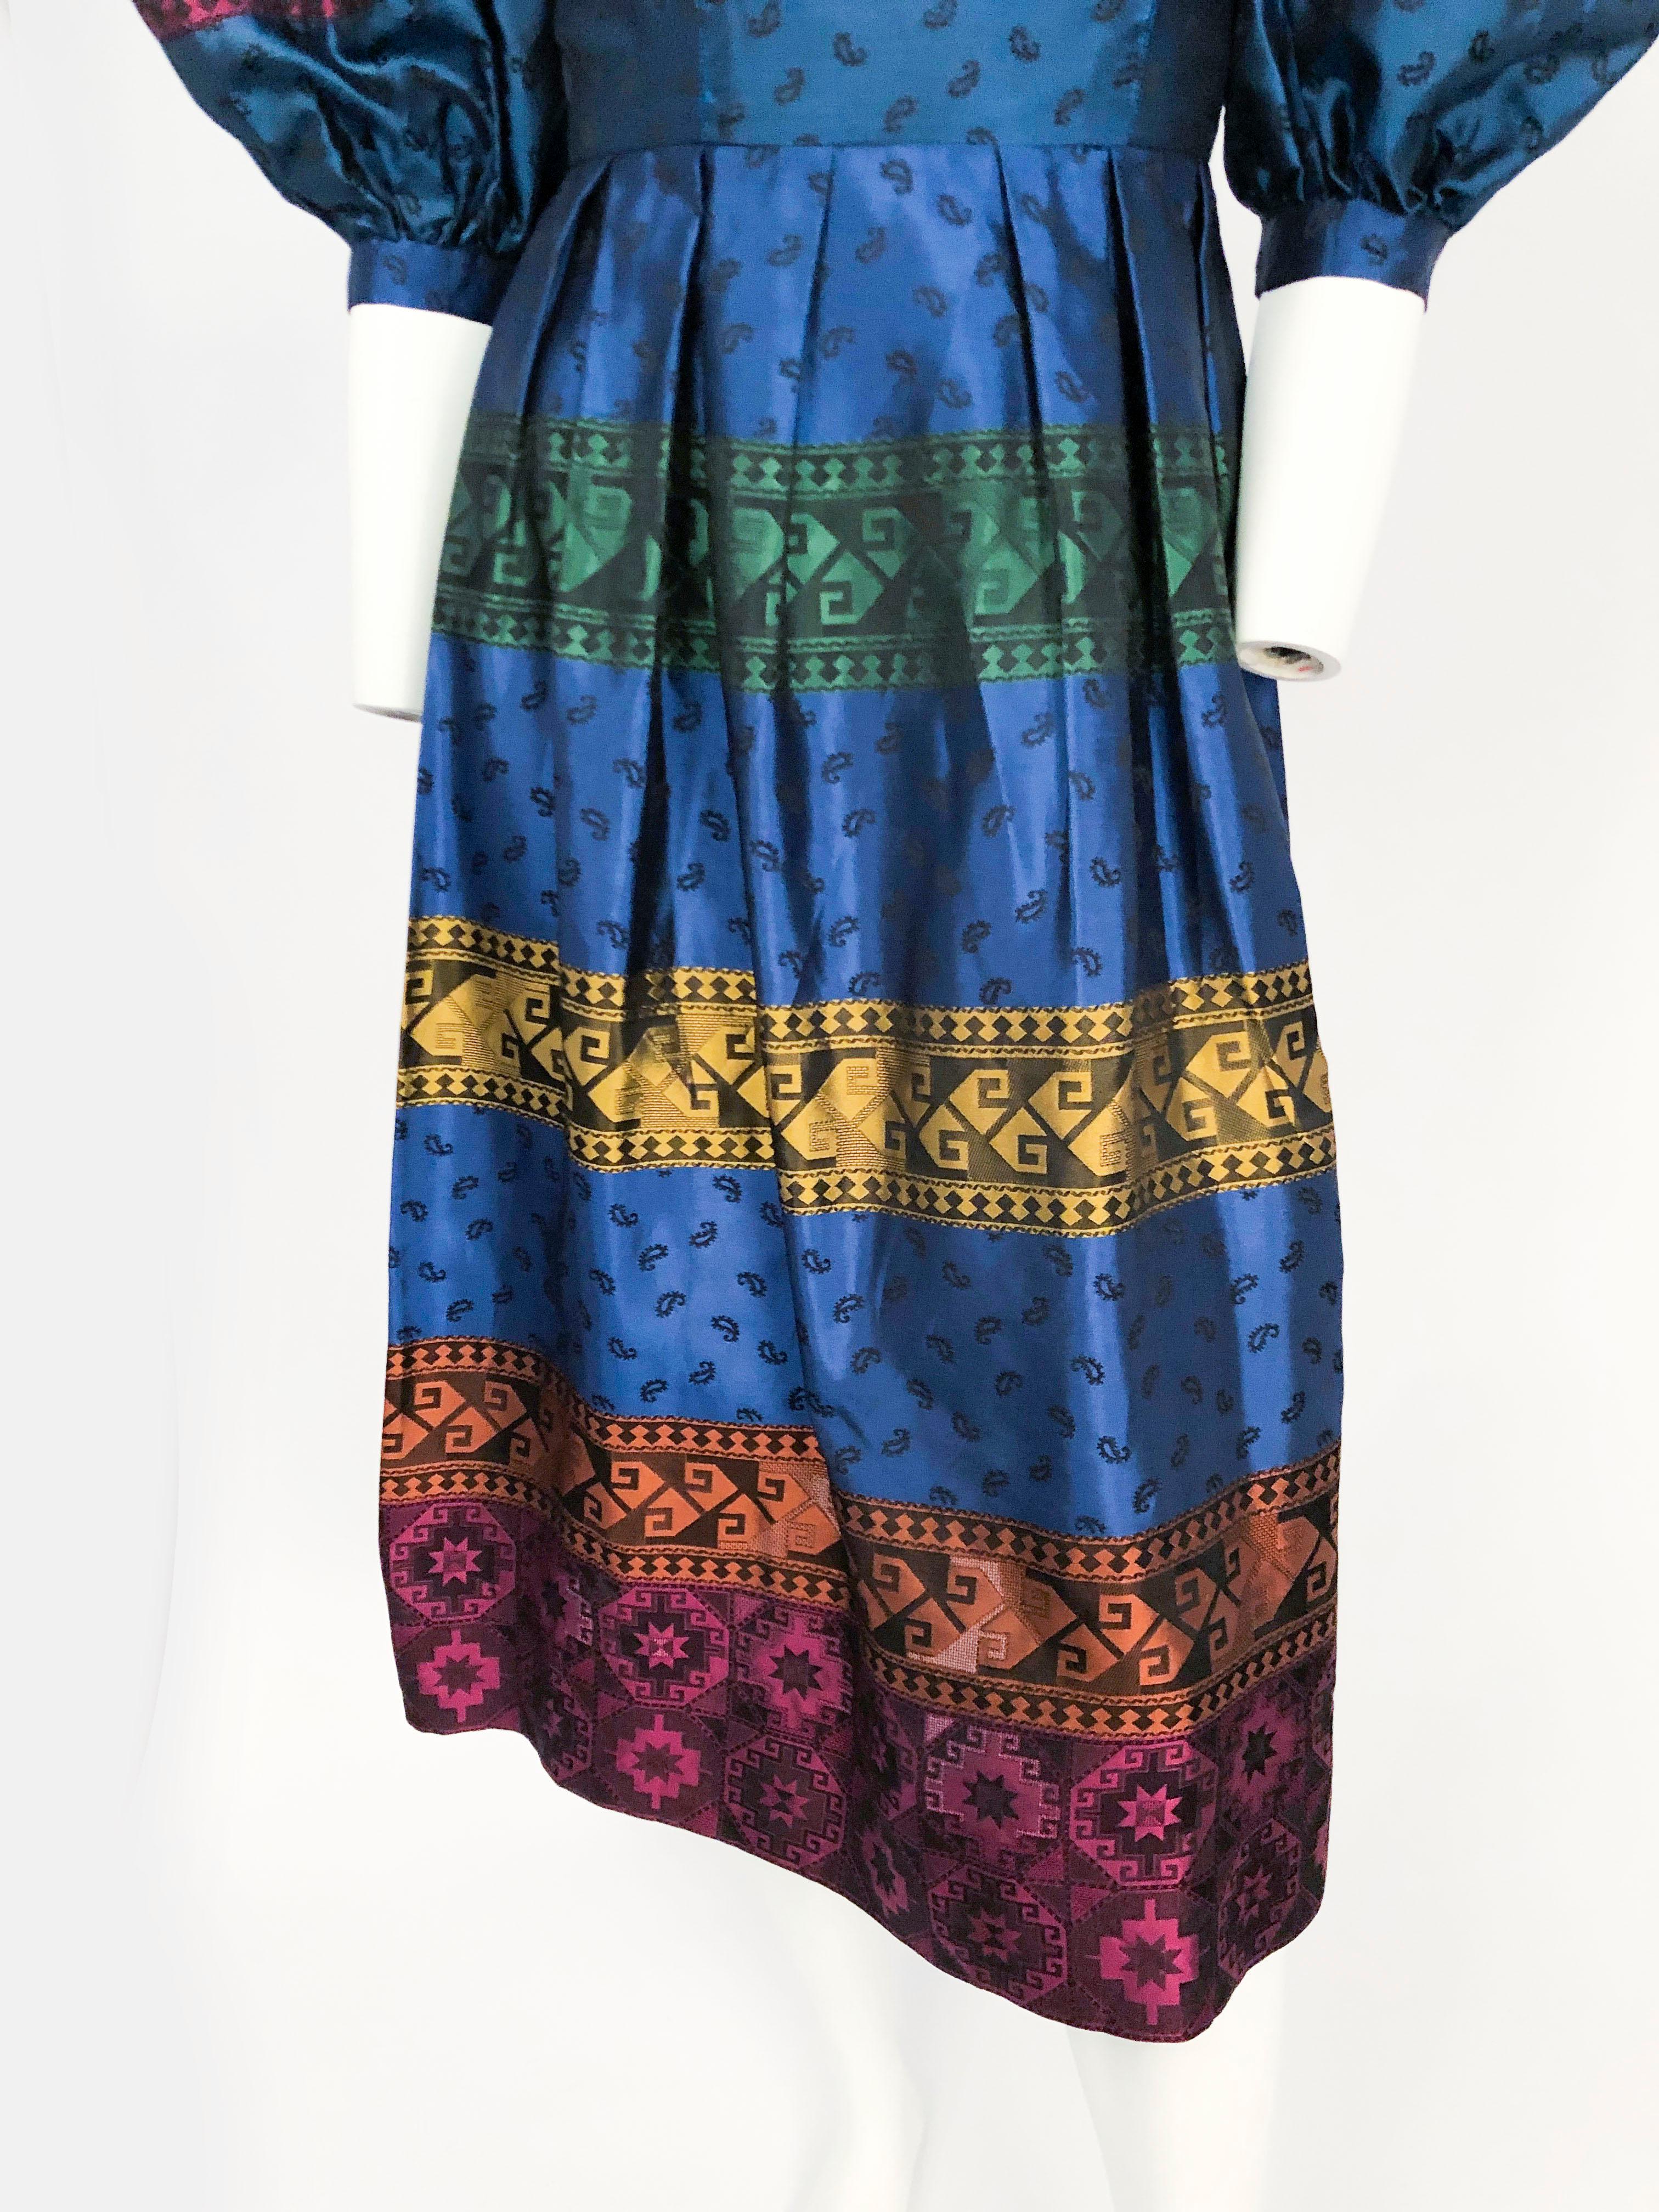 1980s Silk Brocade Multi Colored Dress with Oversized Puff Sleeves, sweetheart neckline, bands of geometric patterns and pullwork. The sleeves are elbow-length finished with a 1-inch cuff.